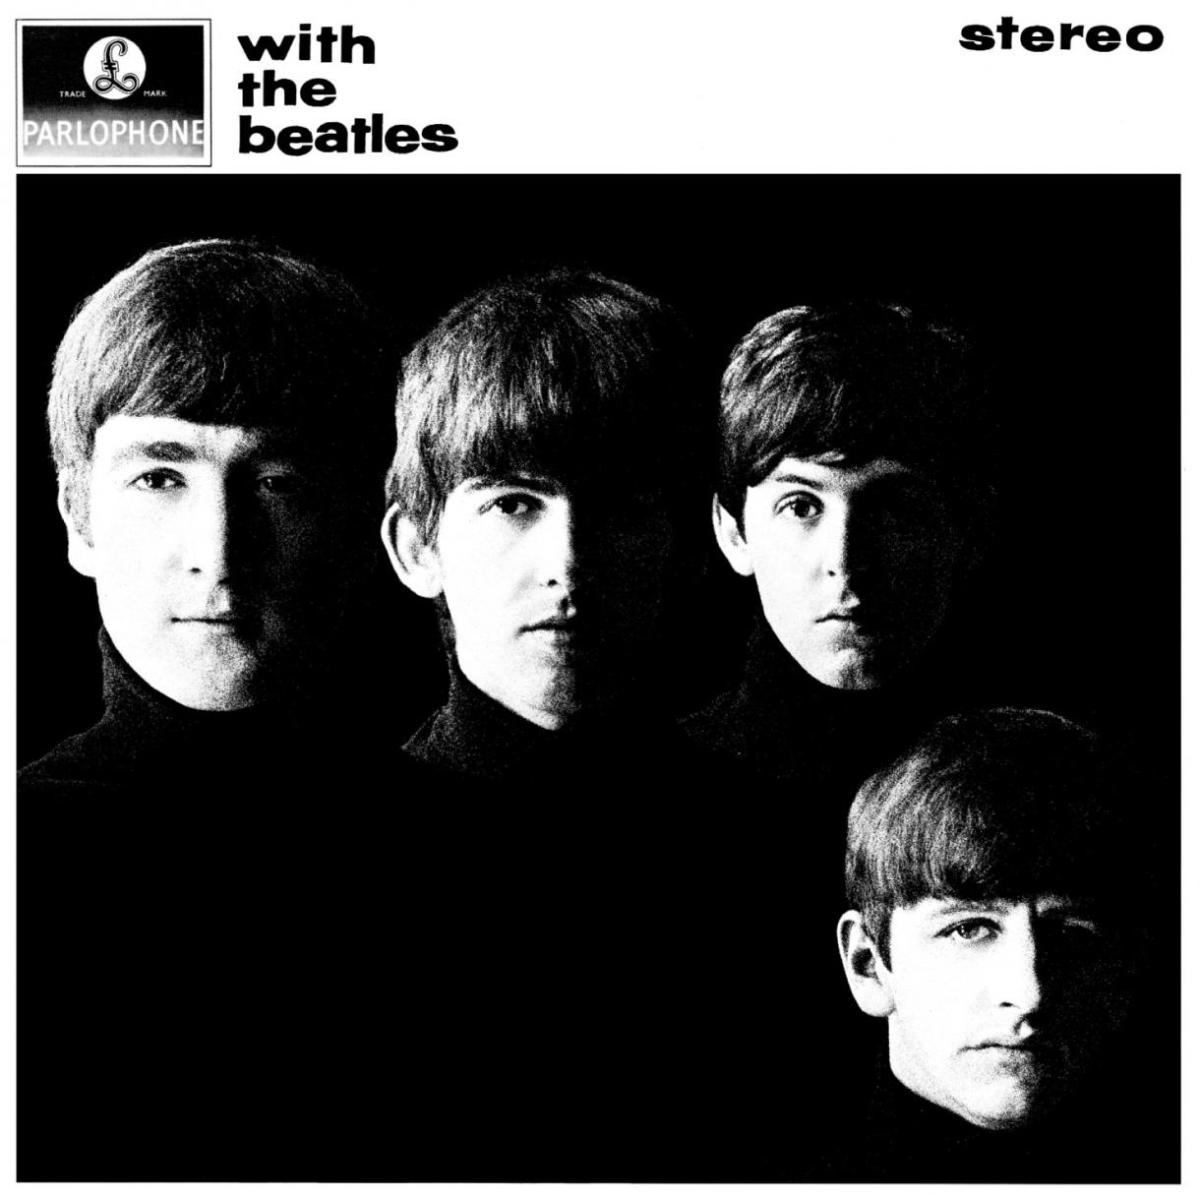 The Beatles – With the Beatles